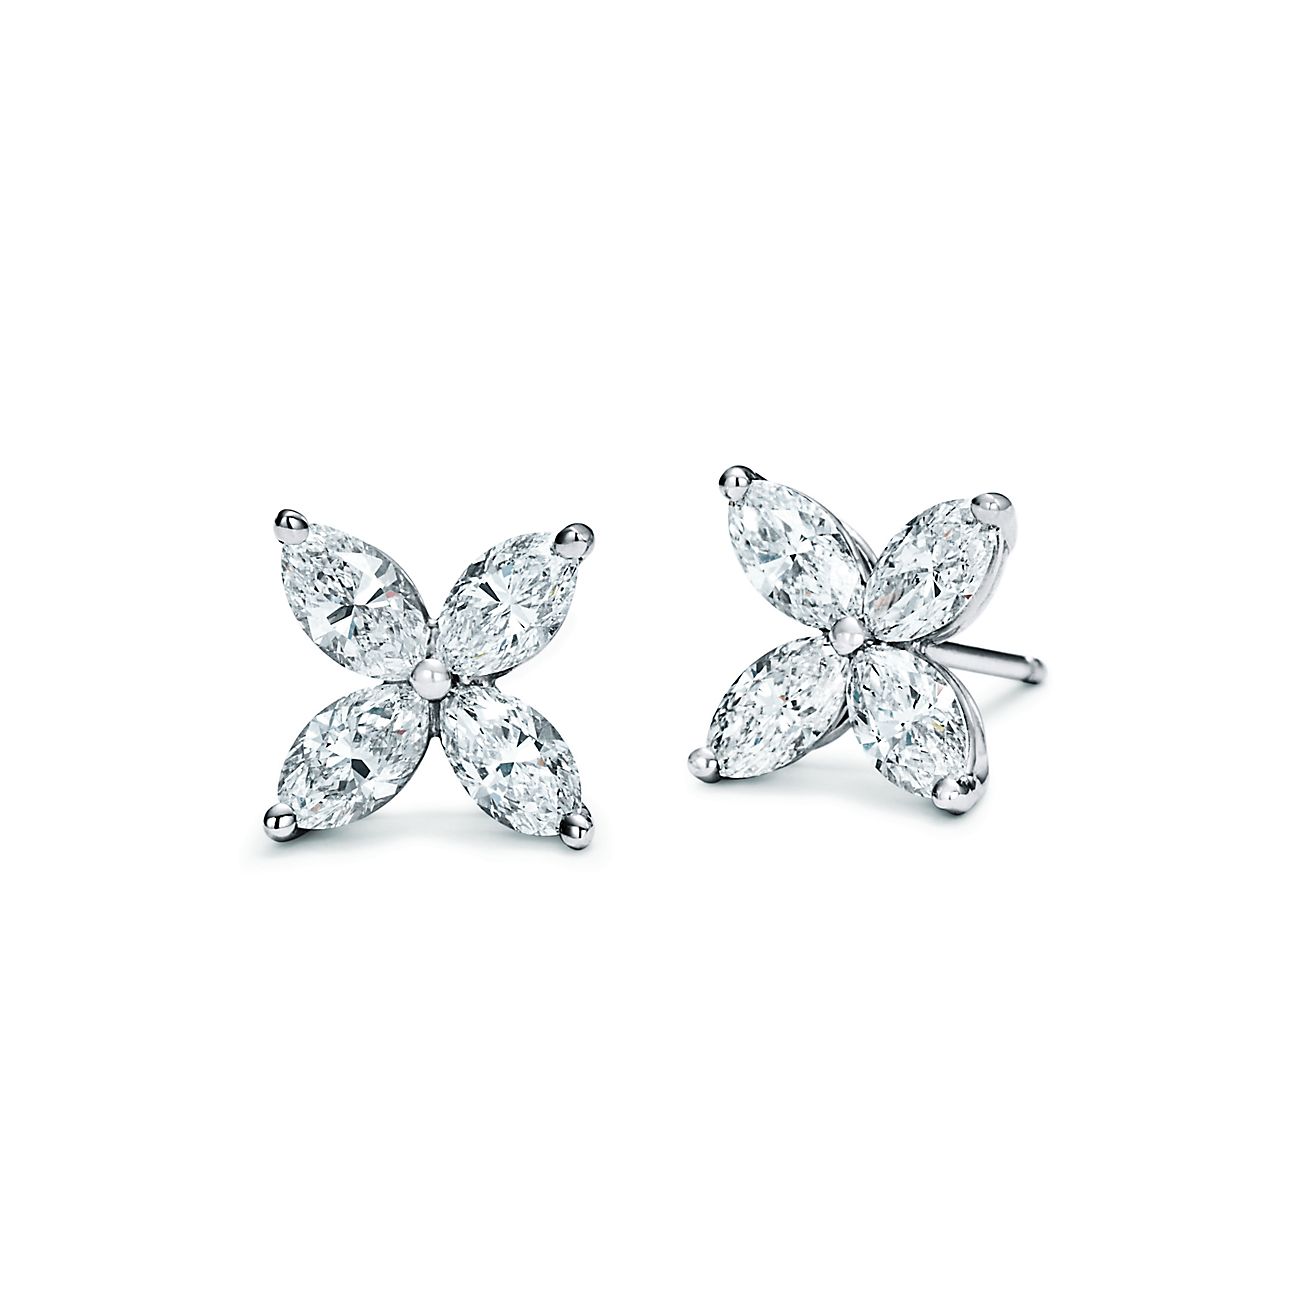 tiffany and co victoria earrings